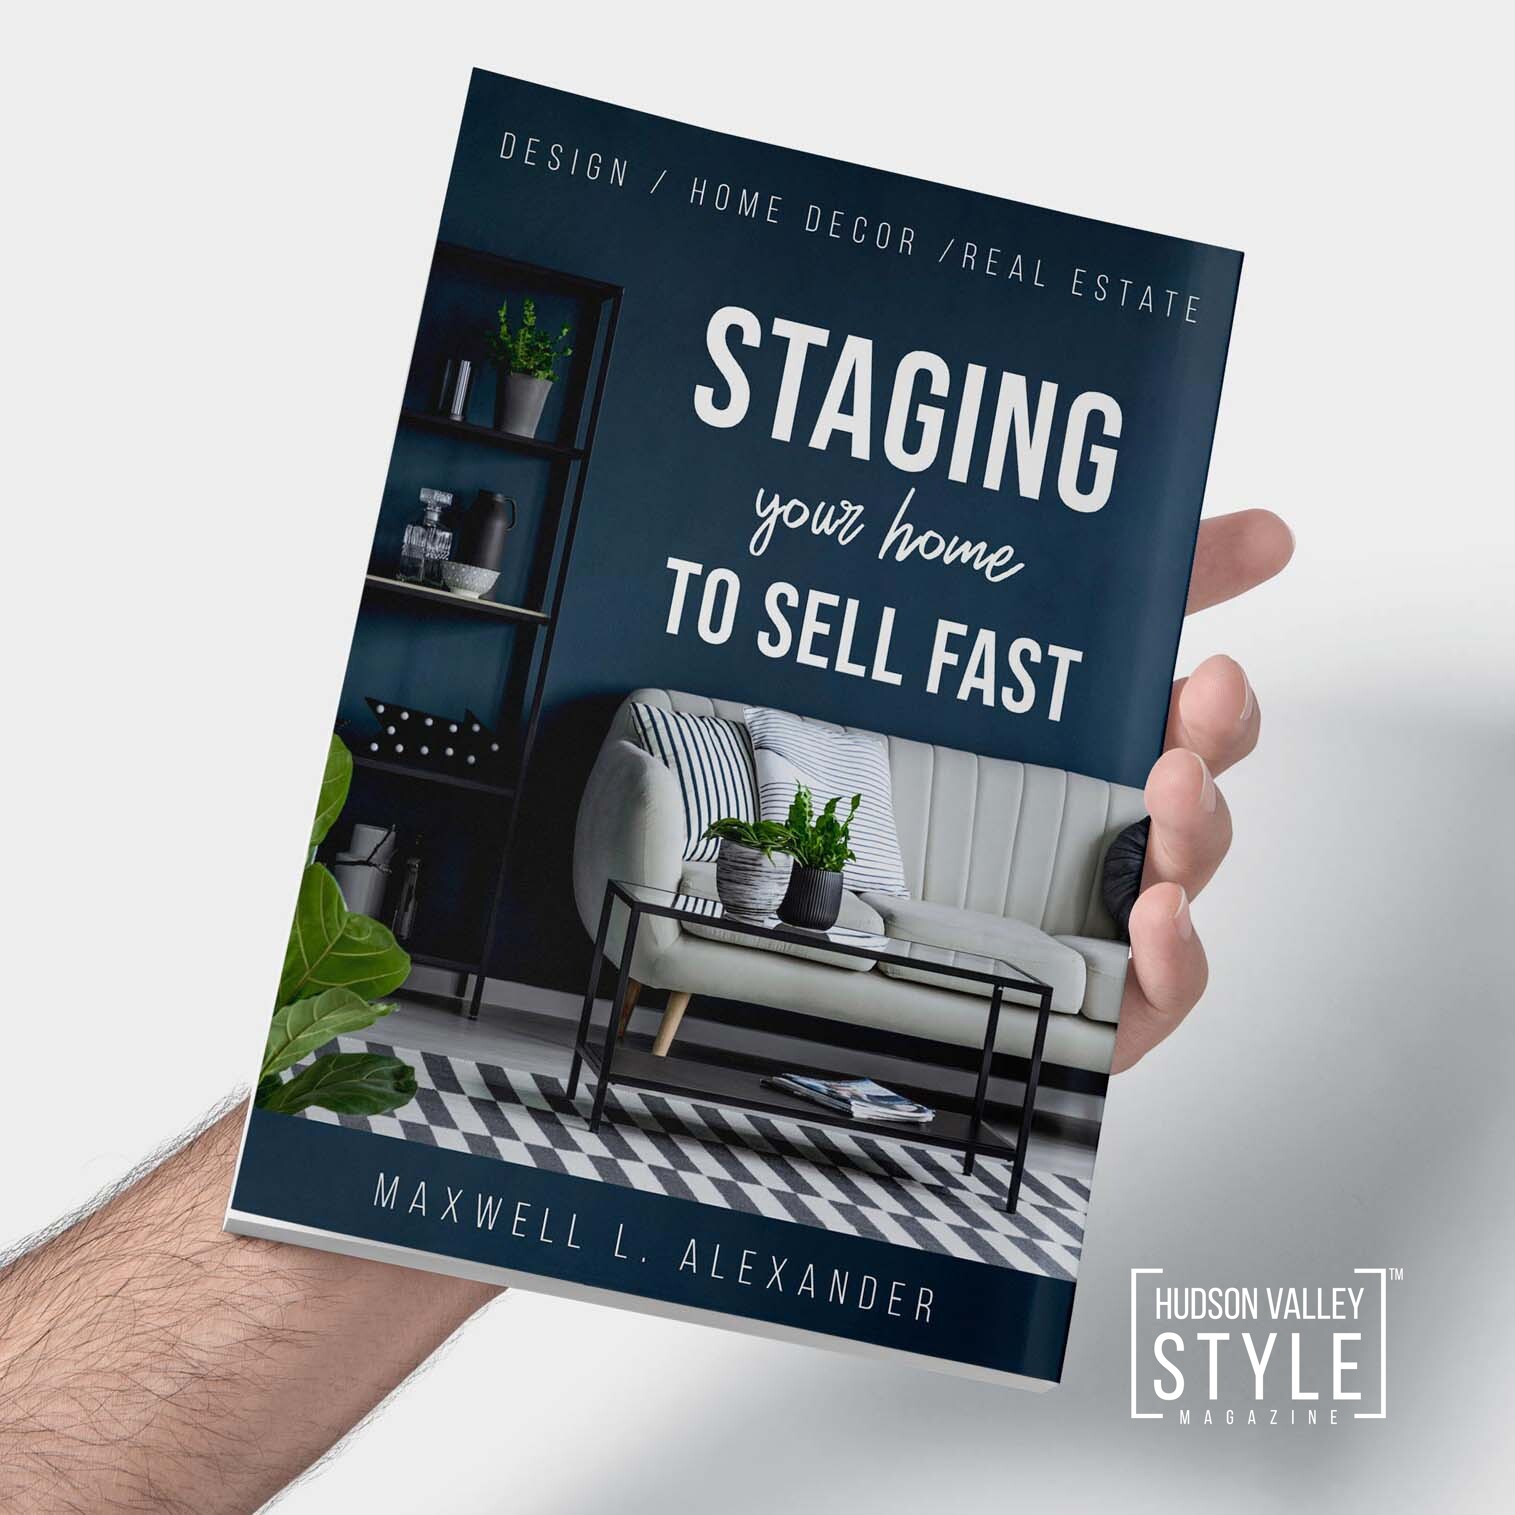 Staging Your Home to Sell Fast – New Book by Maxwell L. Alexander